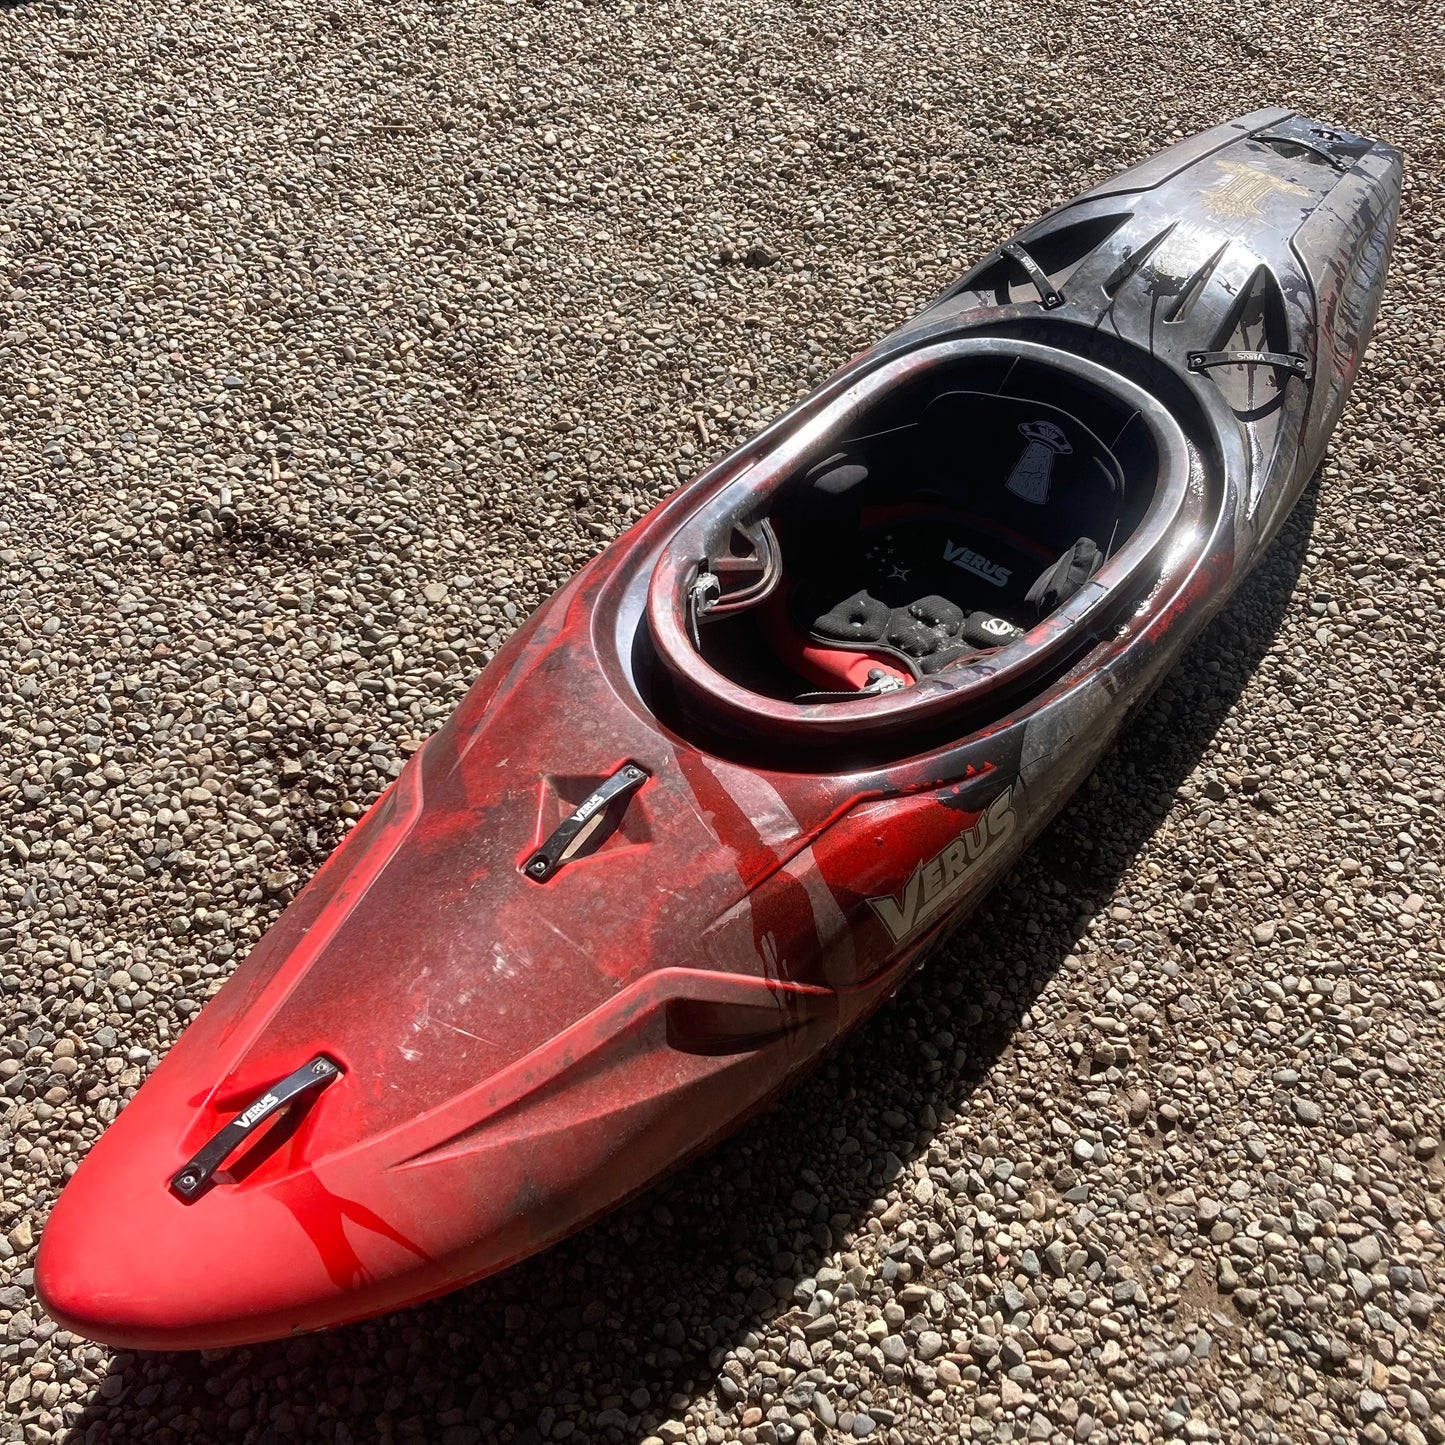 A red and black Demo Flux M/L kayak by Verus laying on gravel.